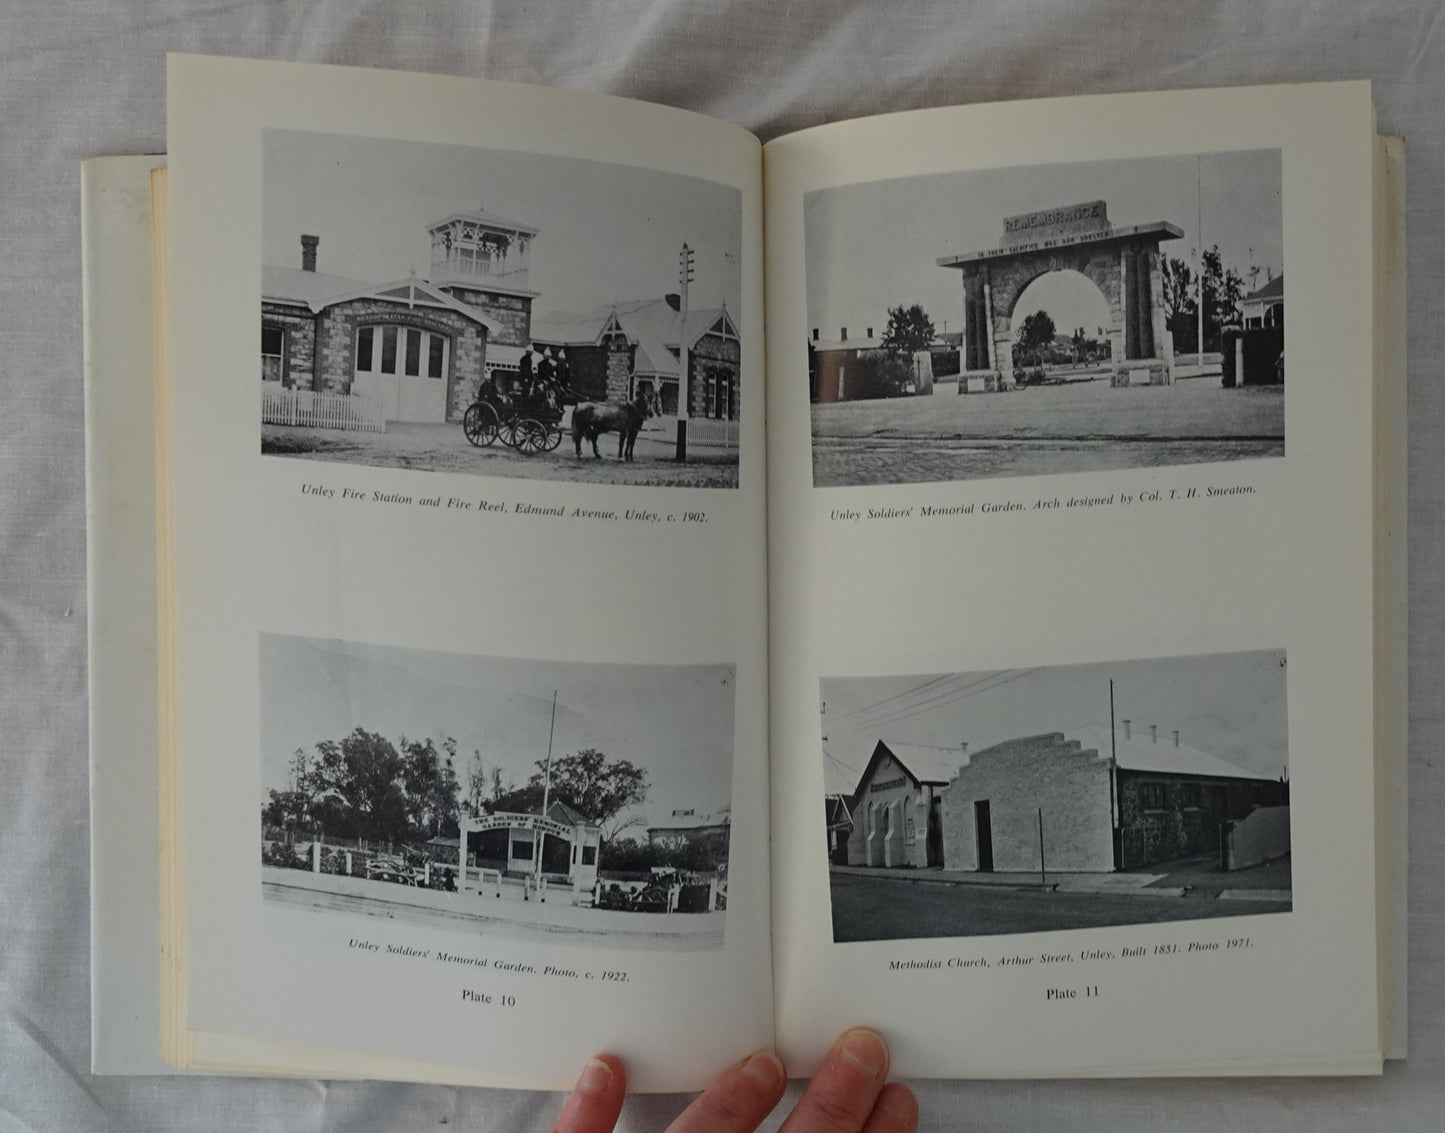 History of Unley 1871-1971 by G. B. Payne and E. Cosh